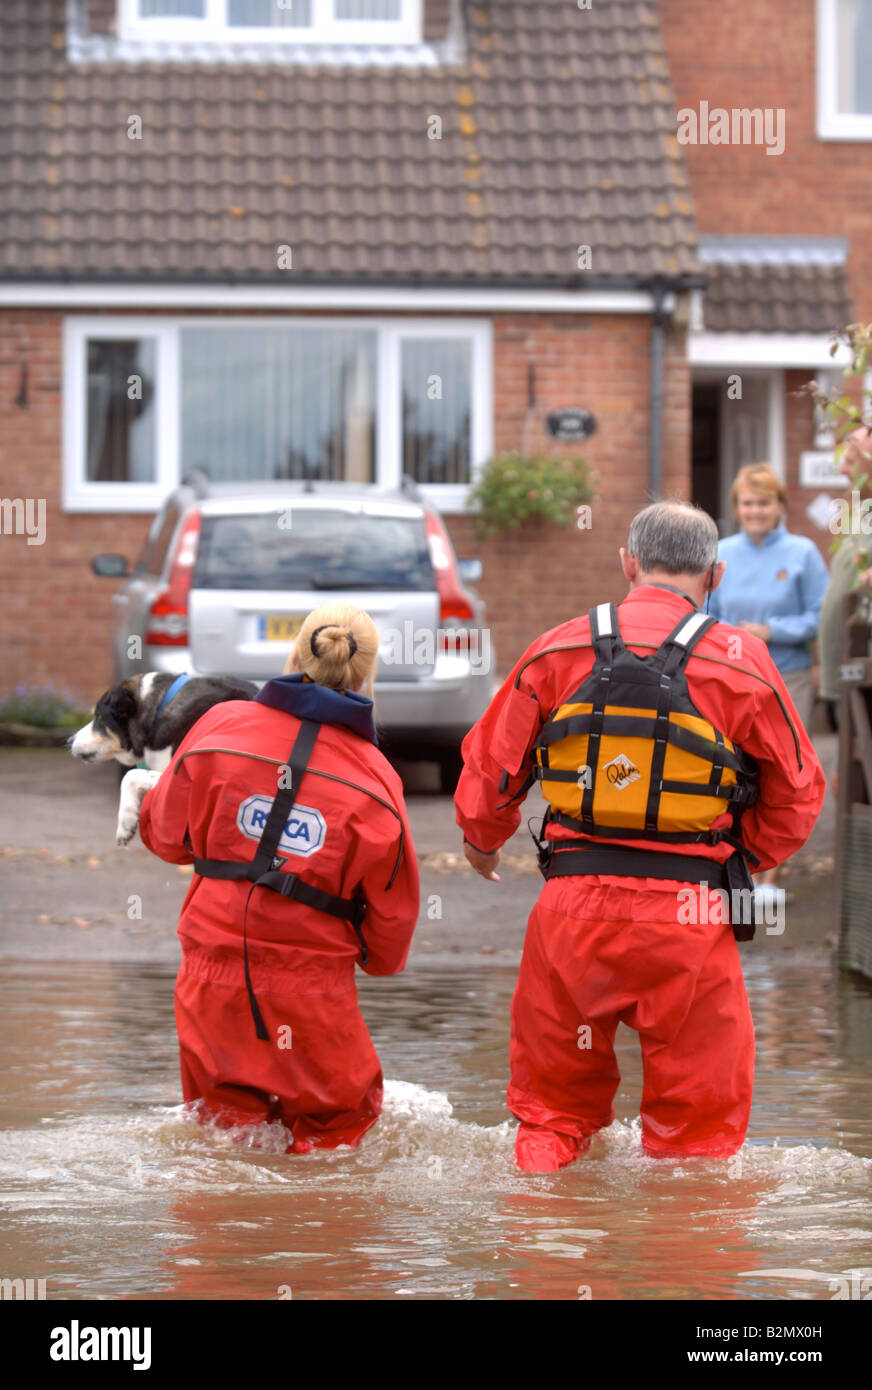 AN RSPCA FLOOD RESCUE OFFICER CARRIES A PET DOG ACROSS A FLOODED STREET WHERE HOMES HAVE BEEN CUT OFF BY FLOODWATER IN TEWKESBUR Stock Photo